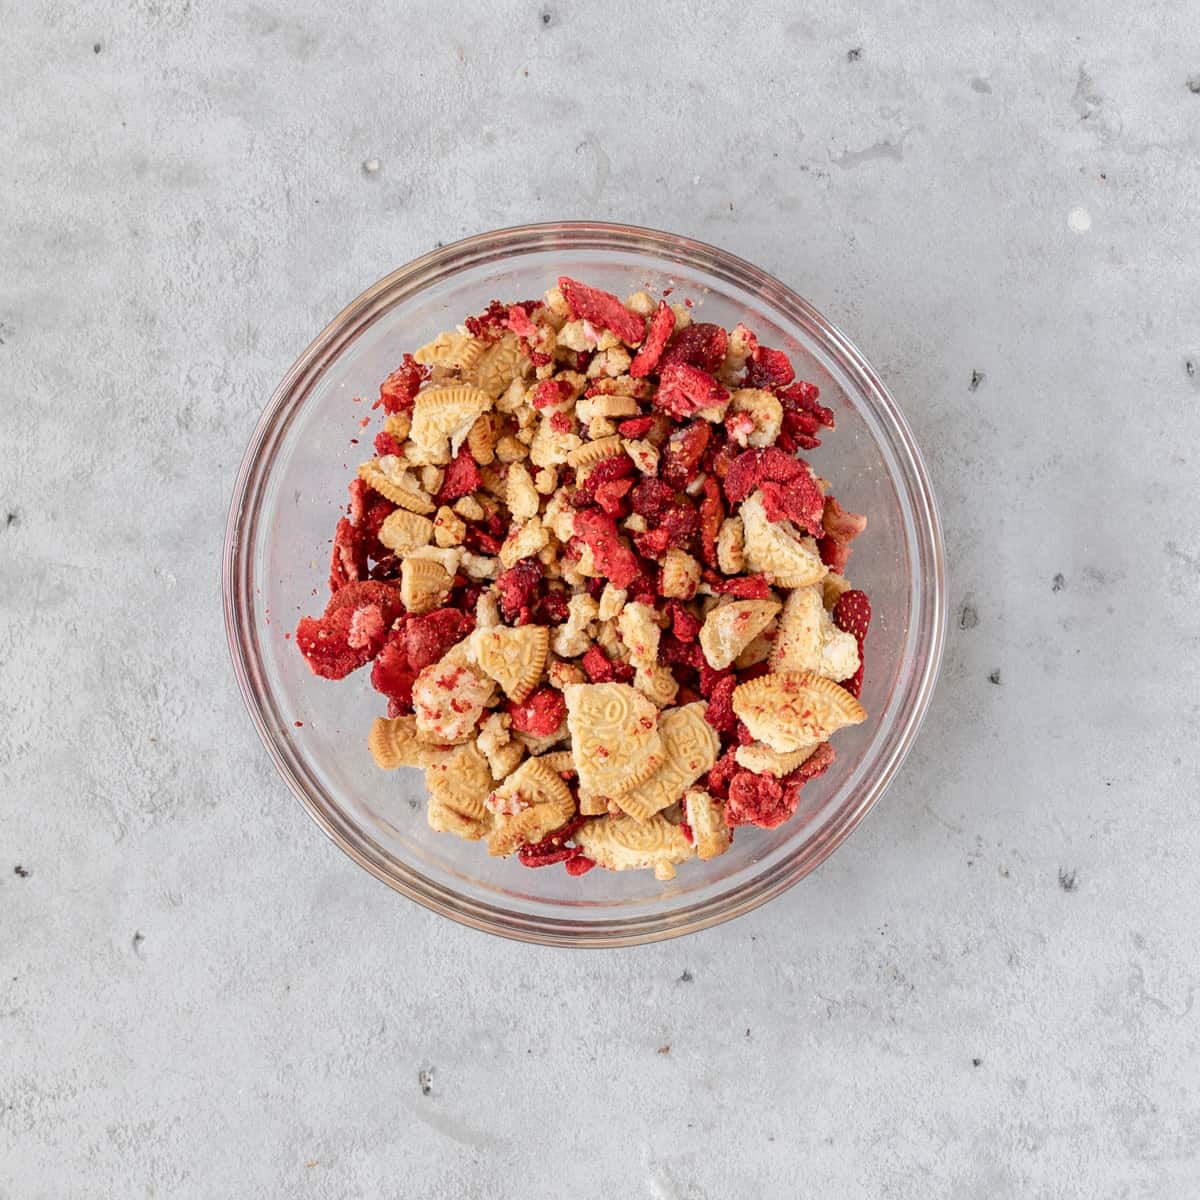 the strawberry crunch in a glass bowl on a grey background